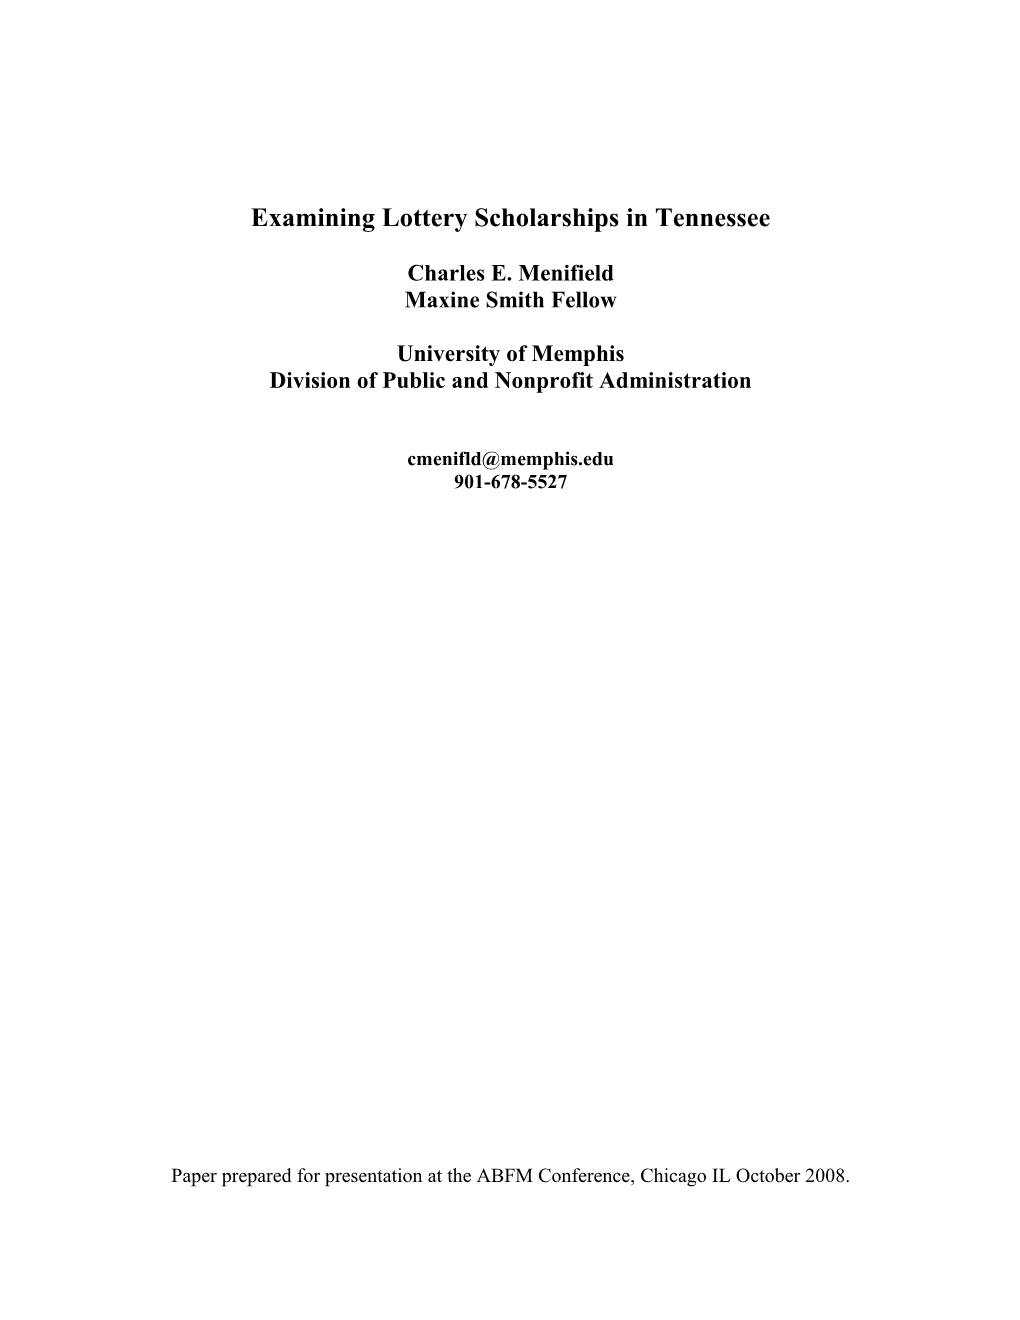 Assessing Lottery Scholarships in Tennessee